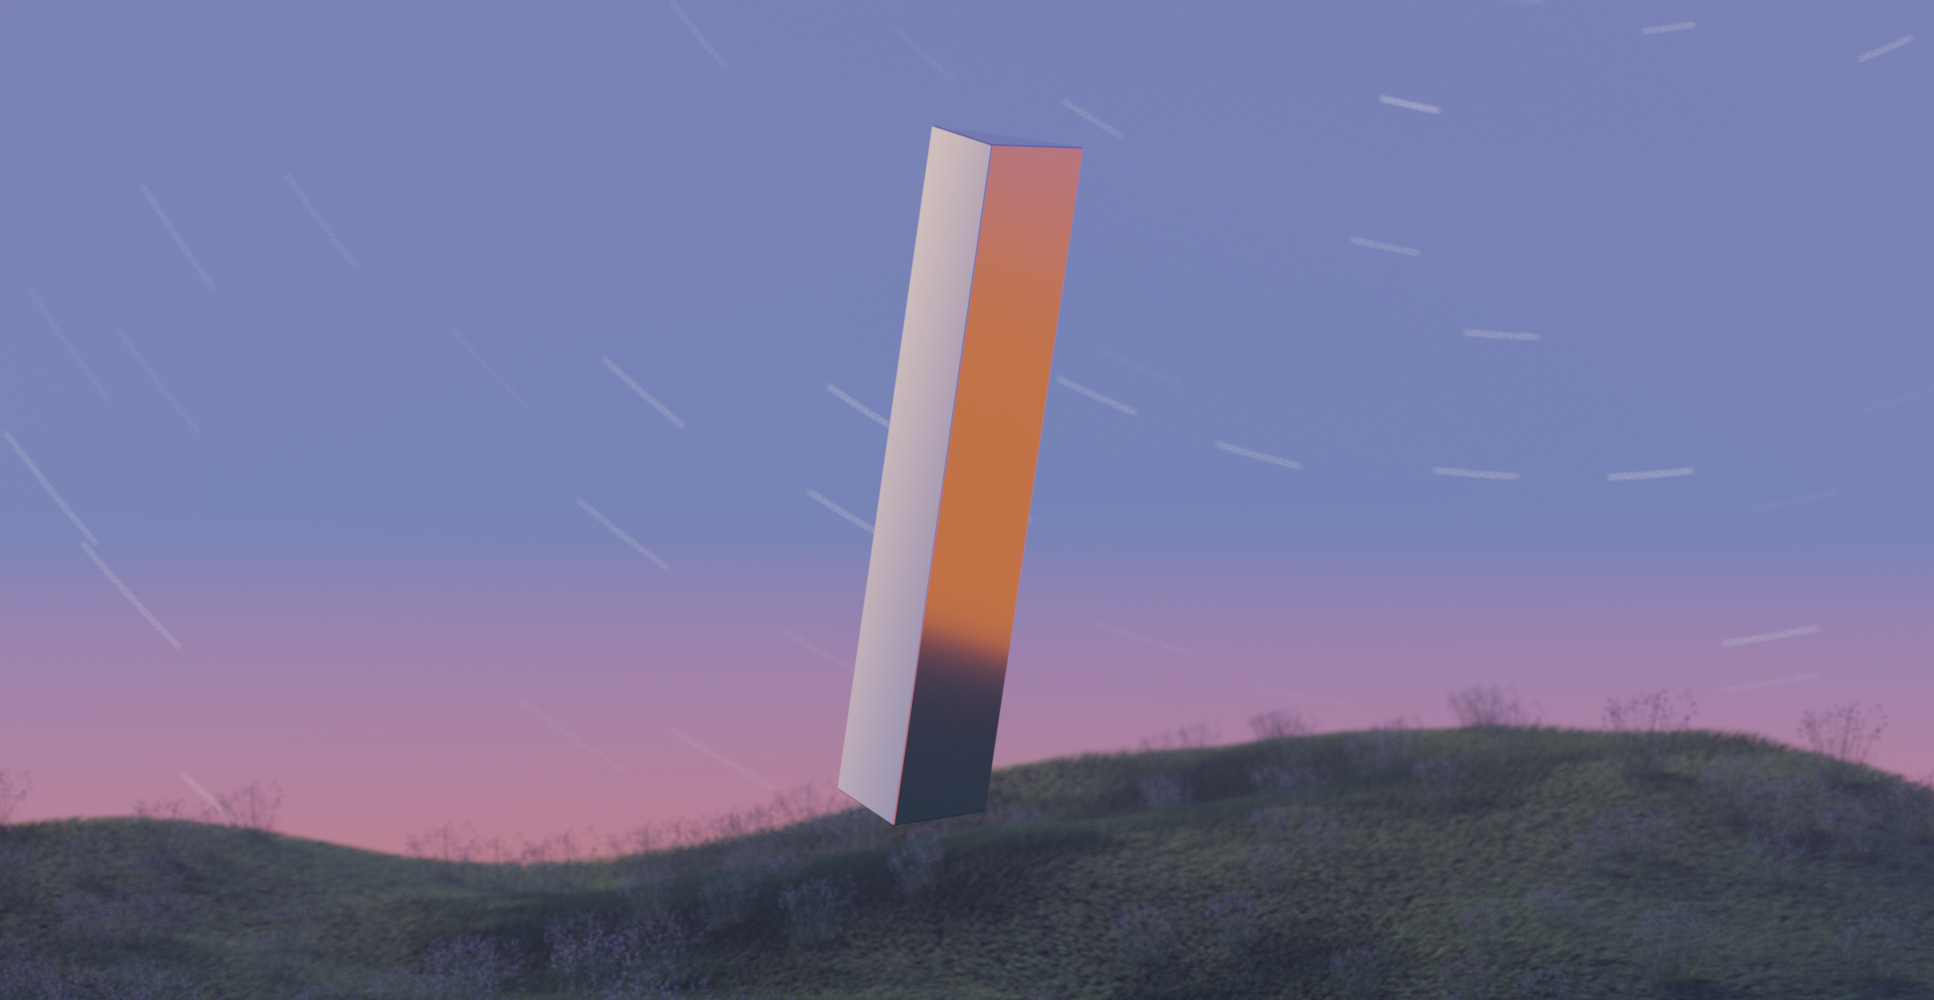 3d rendering of a silver monolith floating above a grassy field